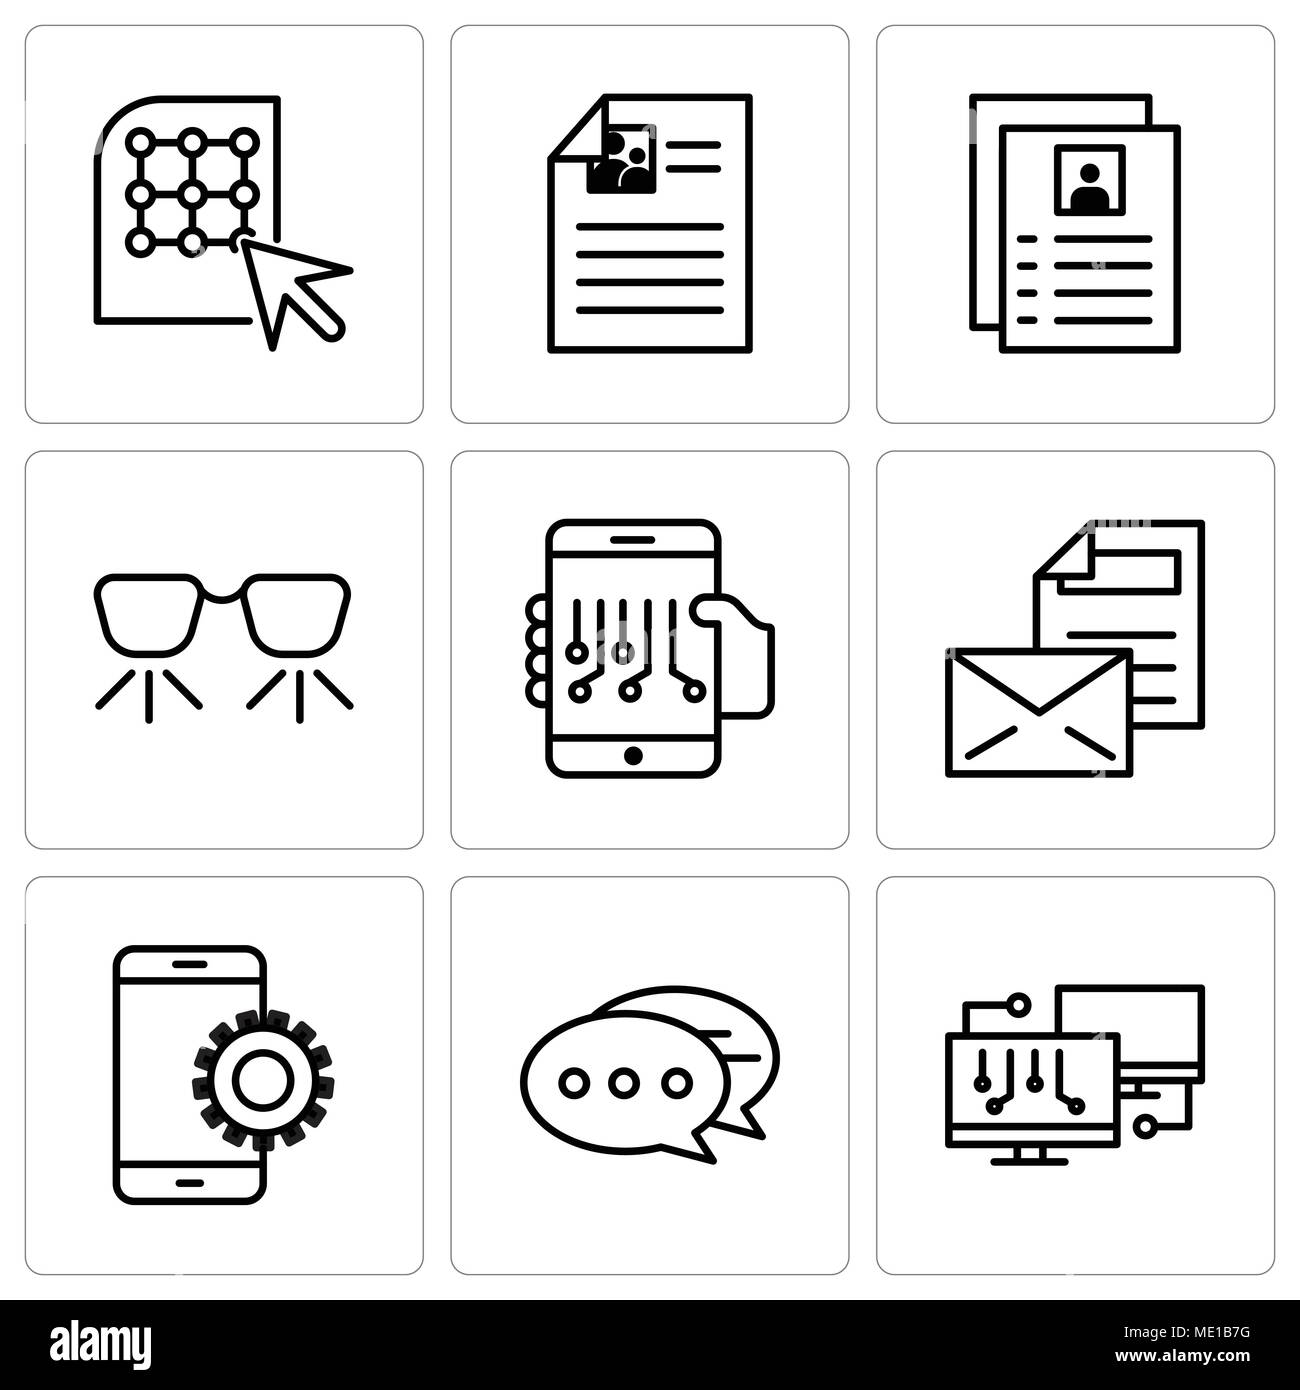 Set Of 9 simple editable icons such as Network, Chat, Setup, Mail, Smartphone, Ar glasses, Flyer, Click, can be used for mobile, web UI Stock Vector